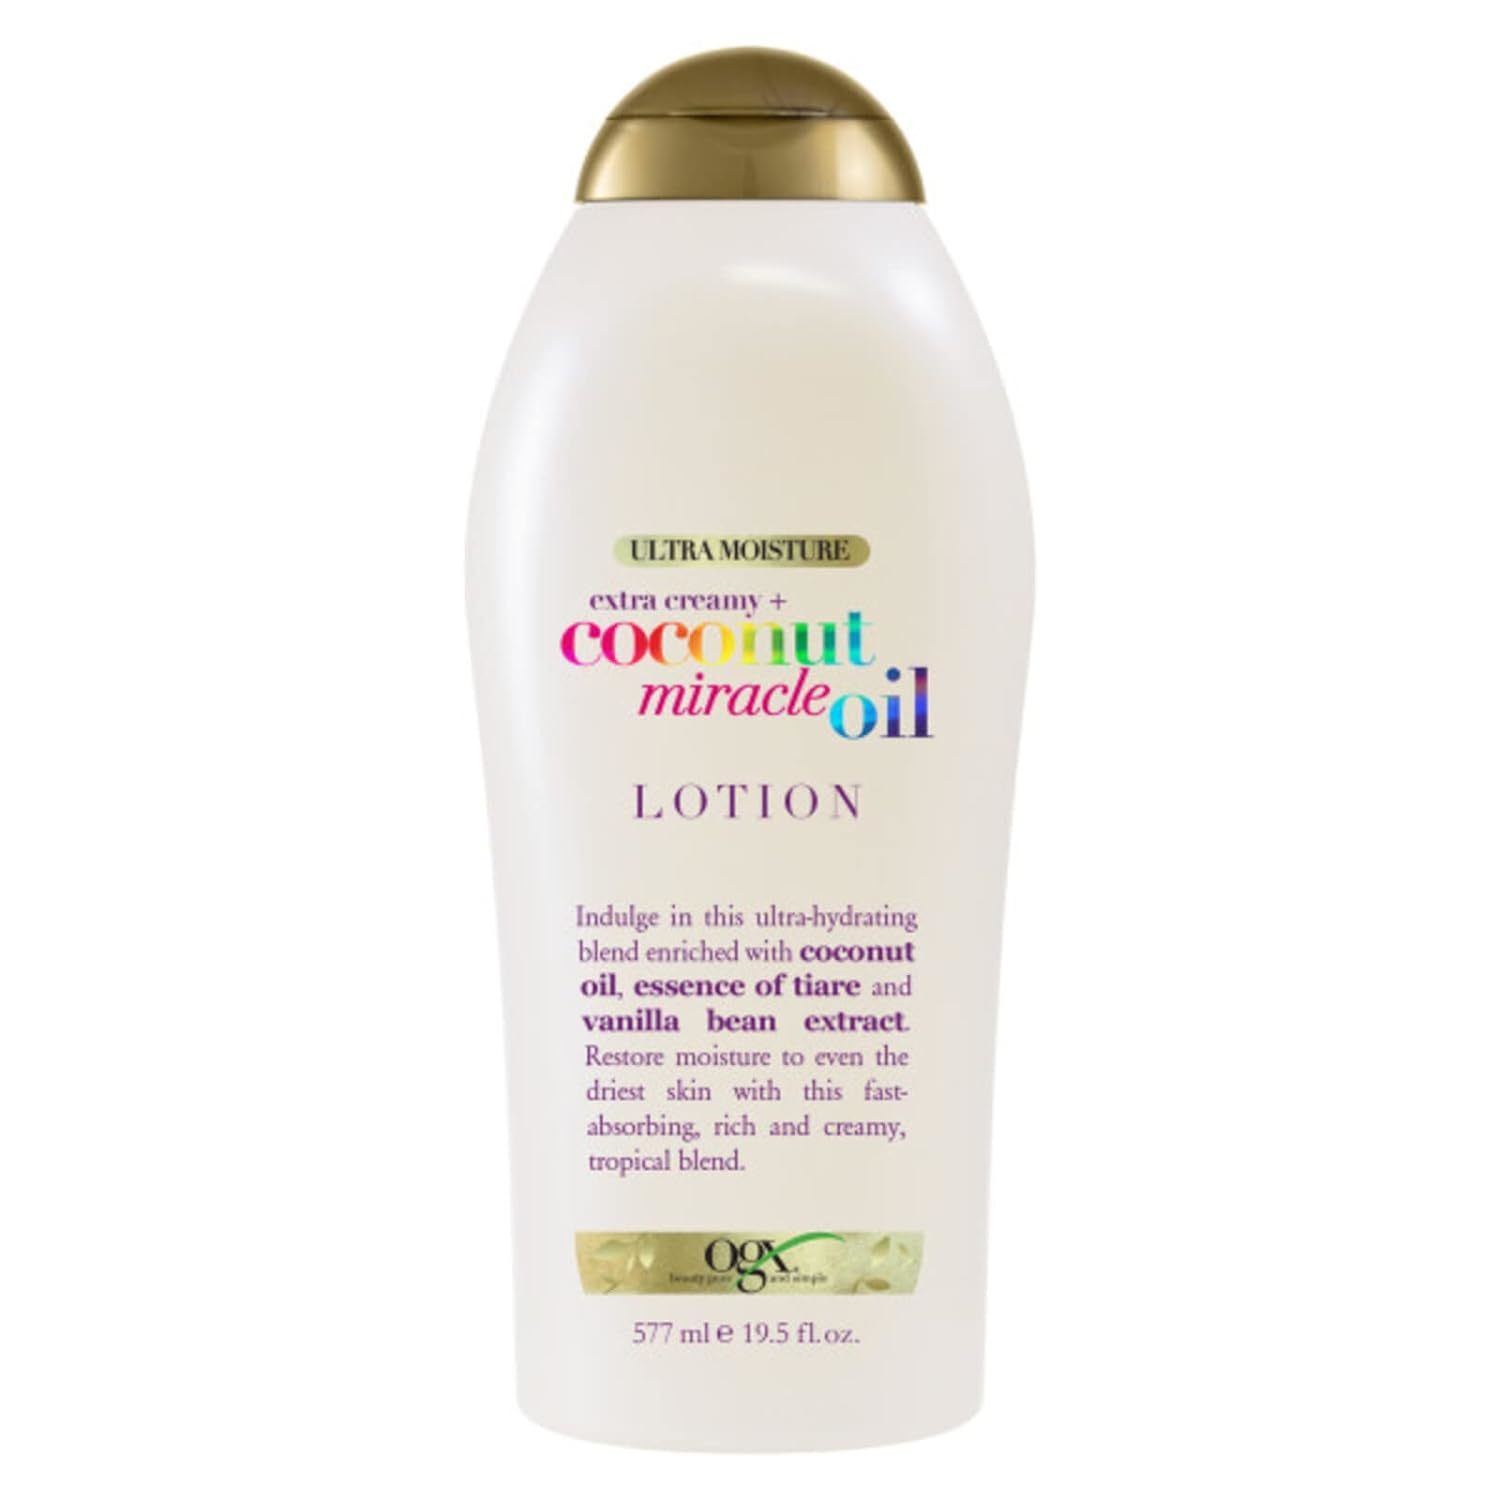 OGX Extra Creamy + Coconut Miracle Oil Ultra Moisture Body Lotion with Vanilla B - $34.99